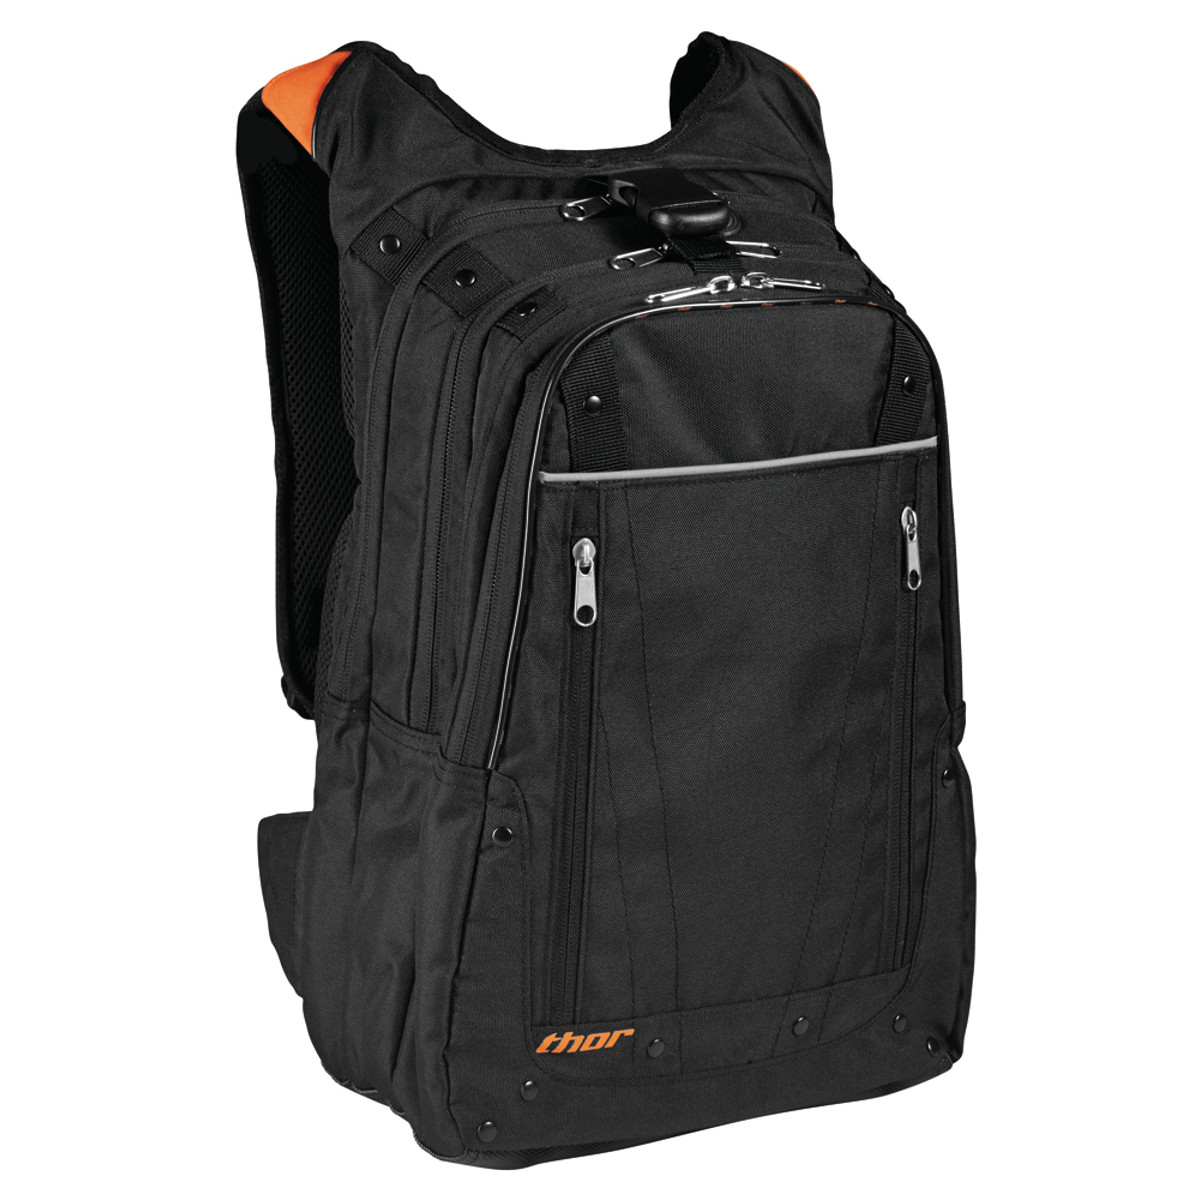 Thor Backpack with Hydration System Compartment Reservoir Black/Red Orange